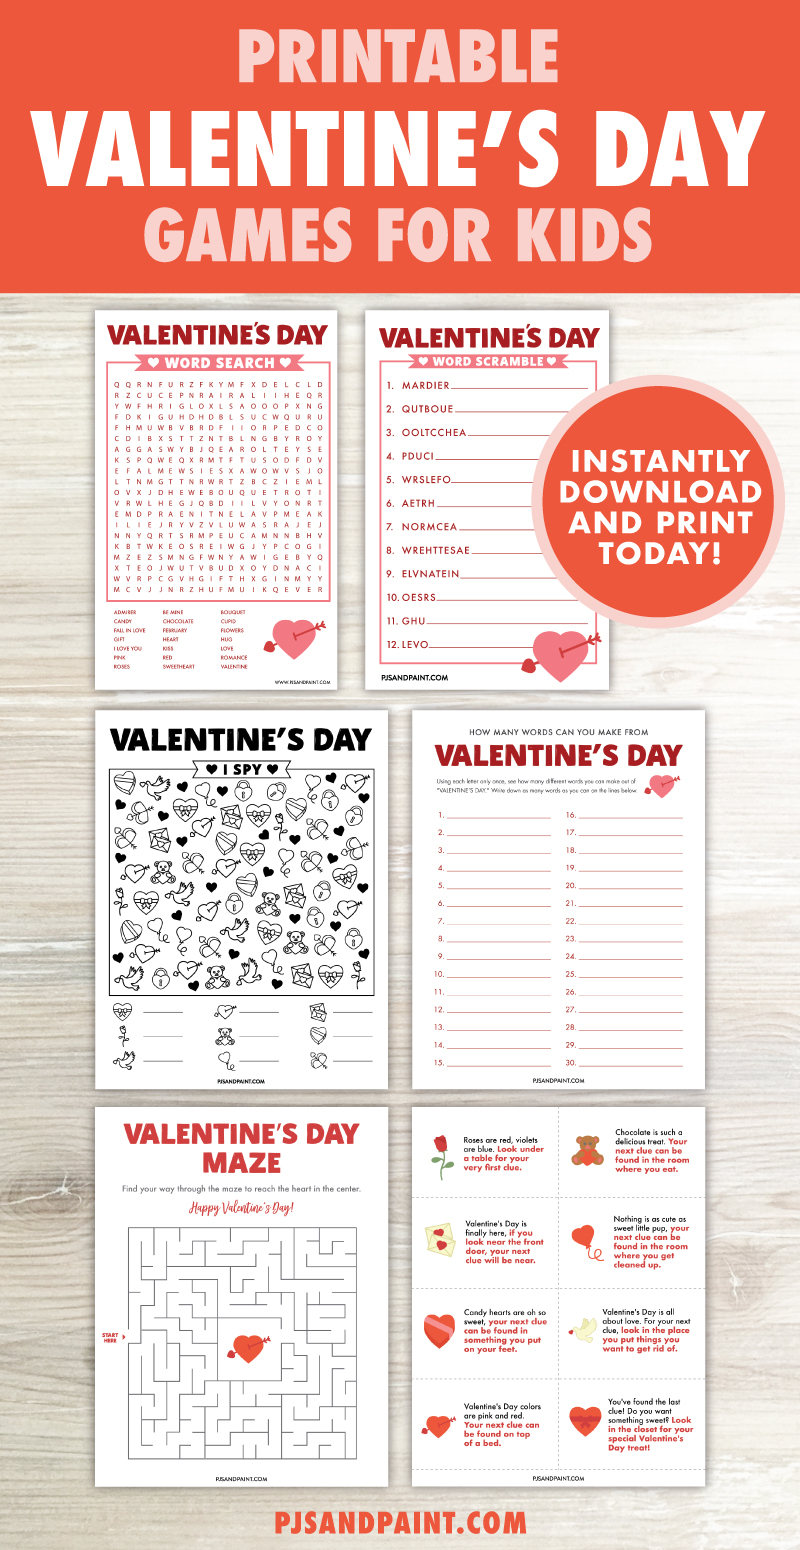 Printable Valentine's Day Printable Game Bundle for Kids Pjs and Paint